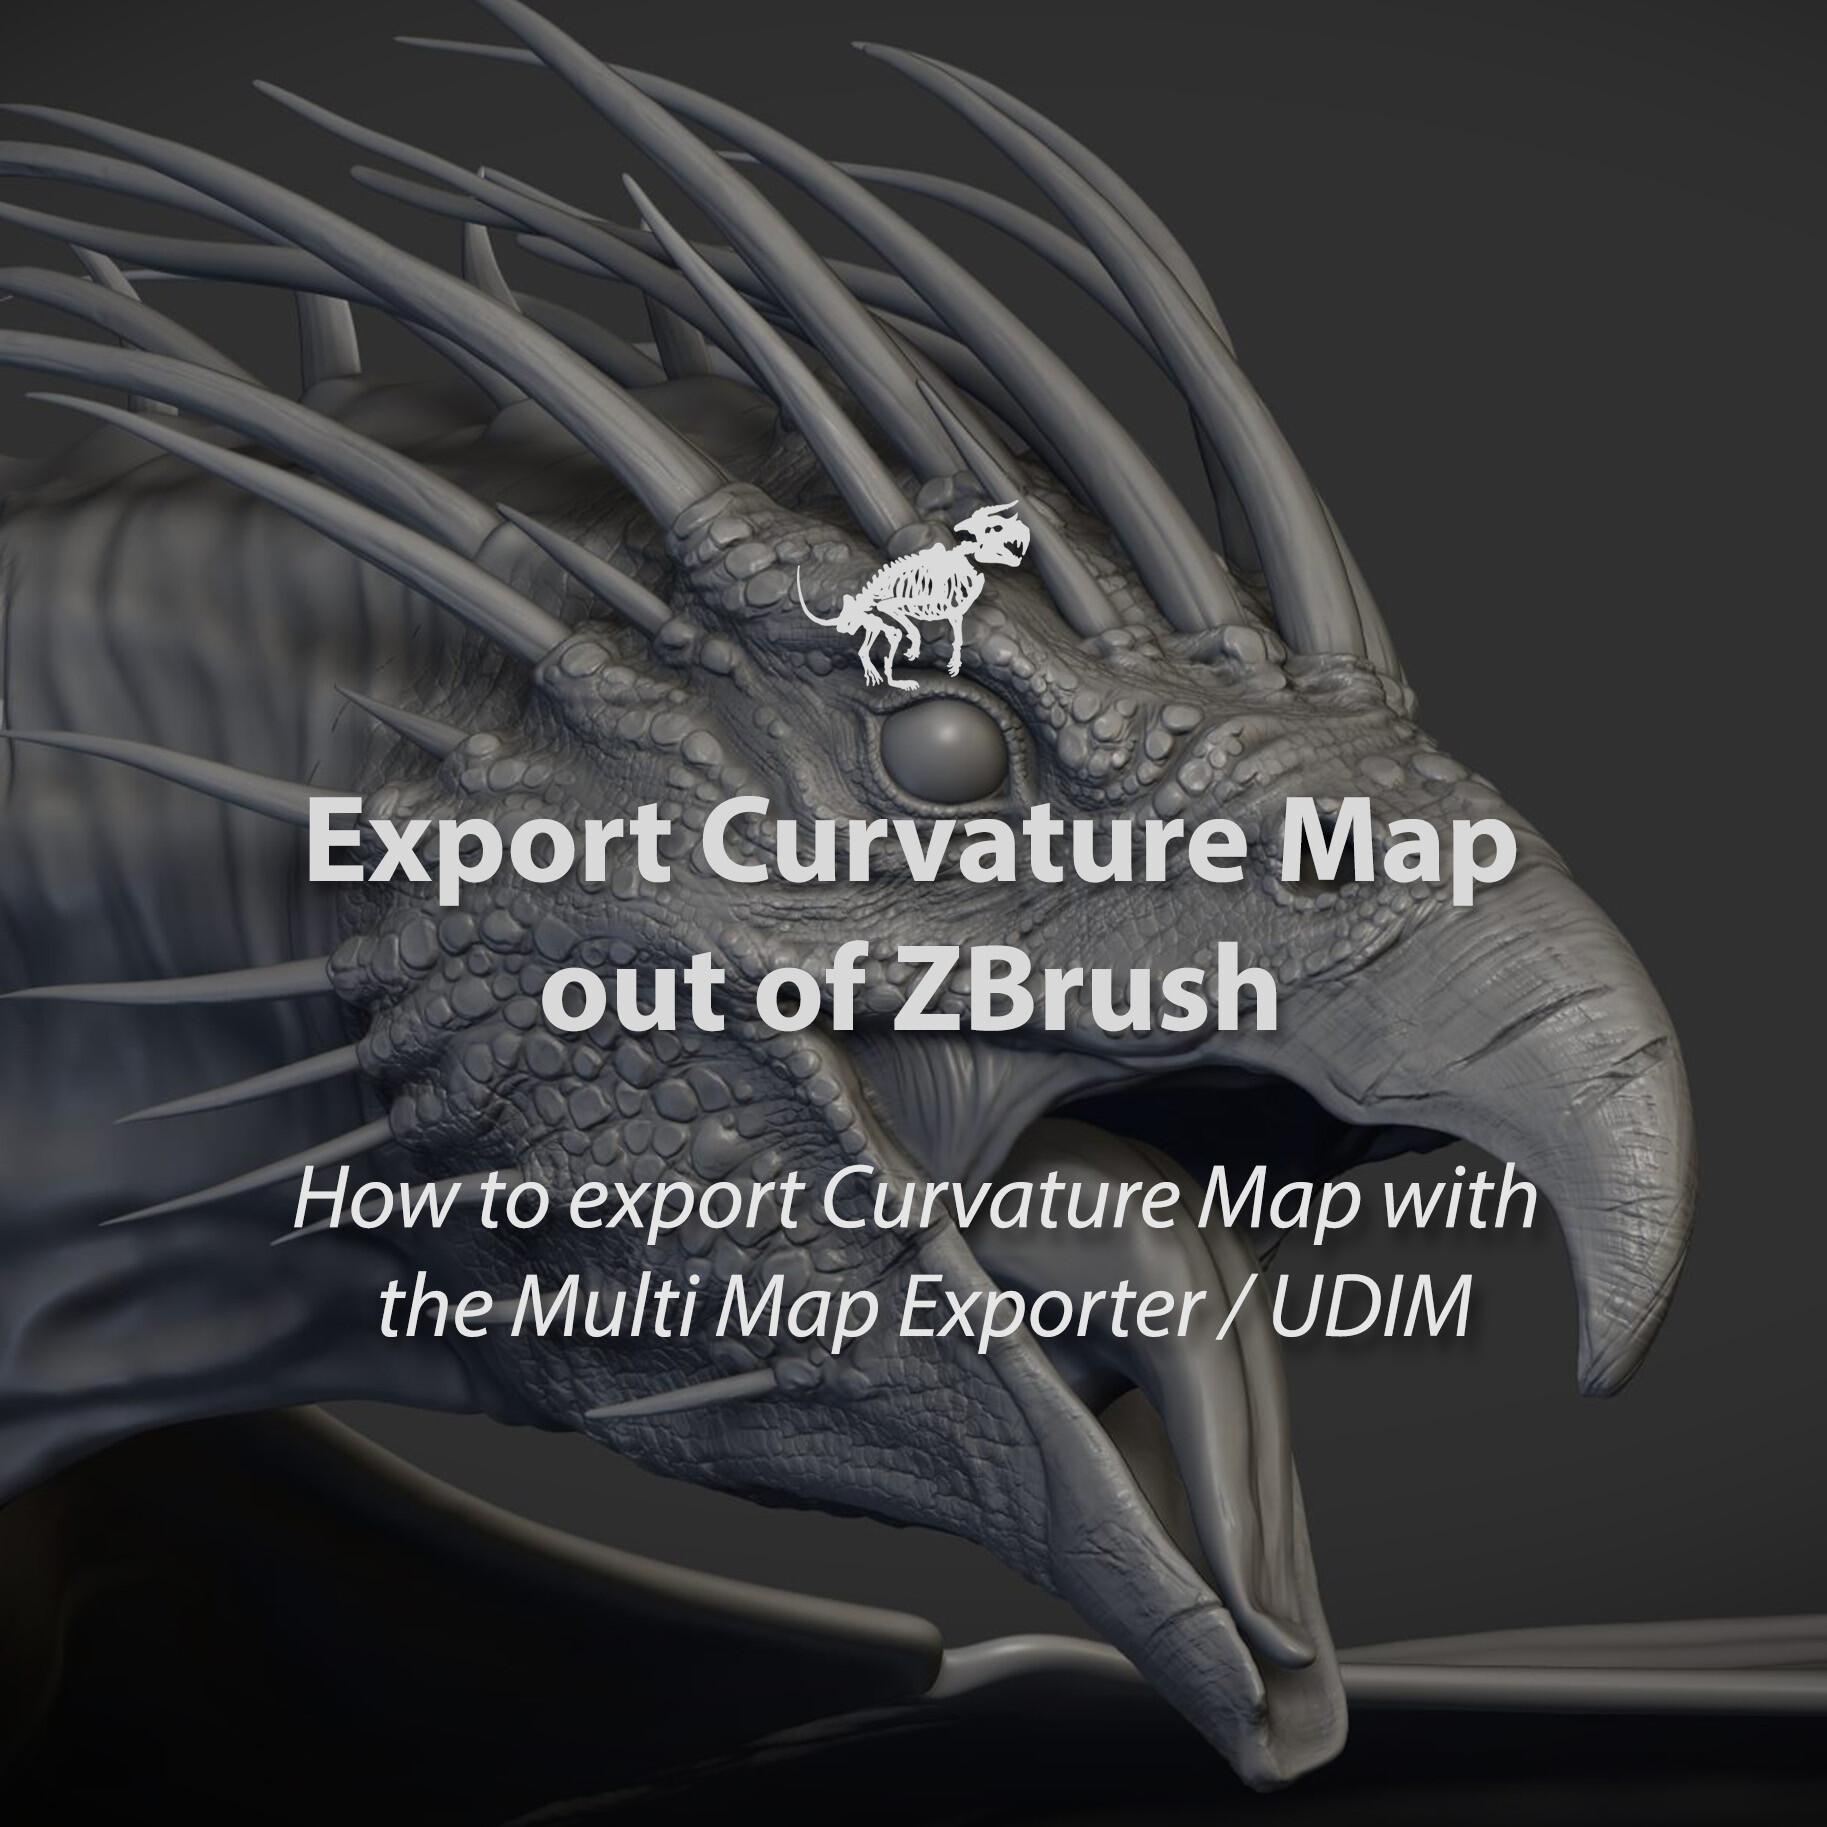 4096 map export zbrush